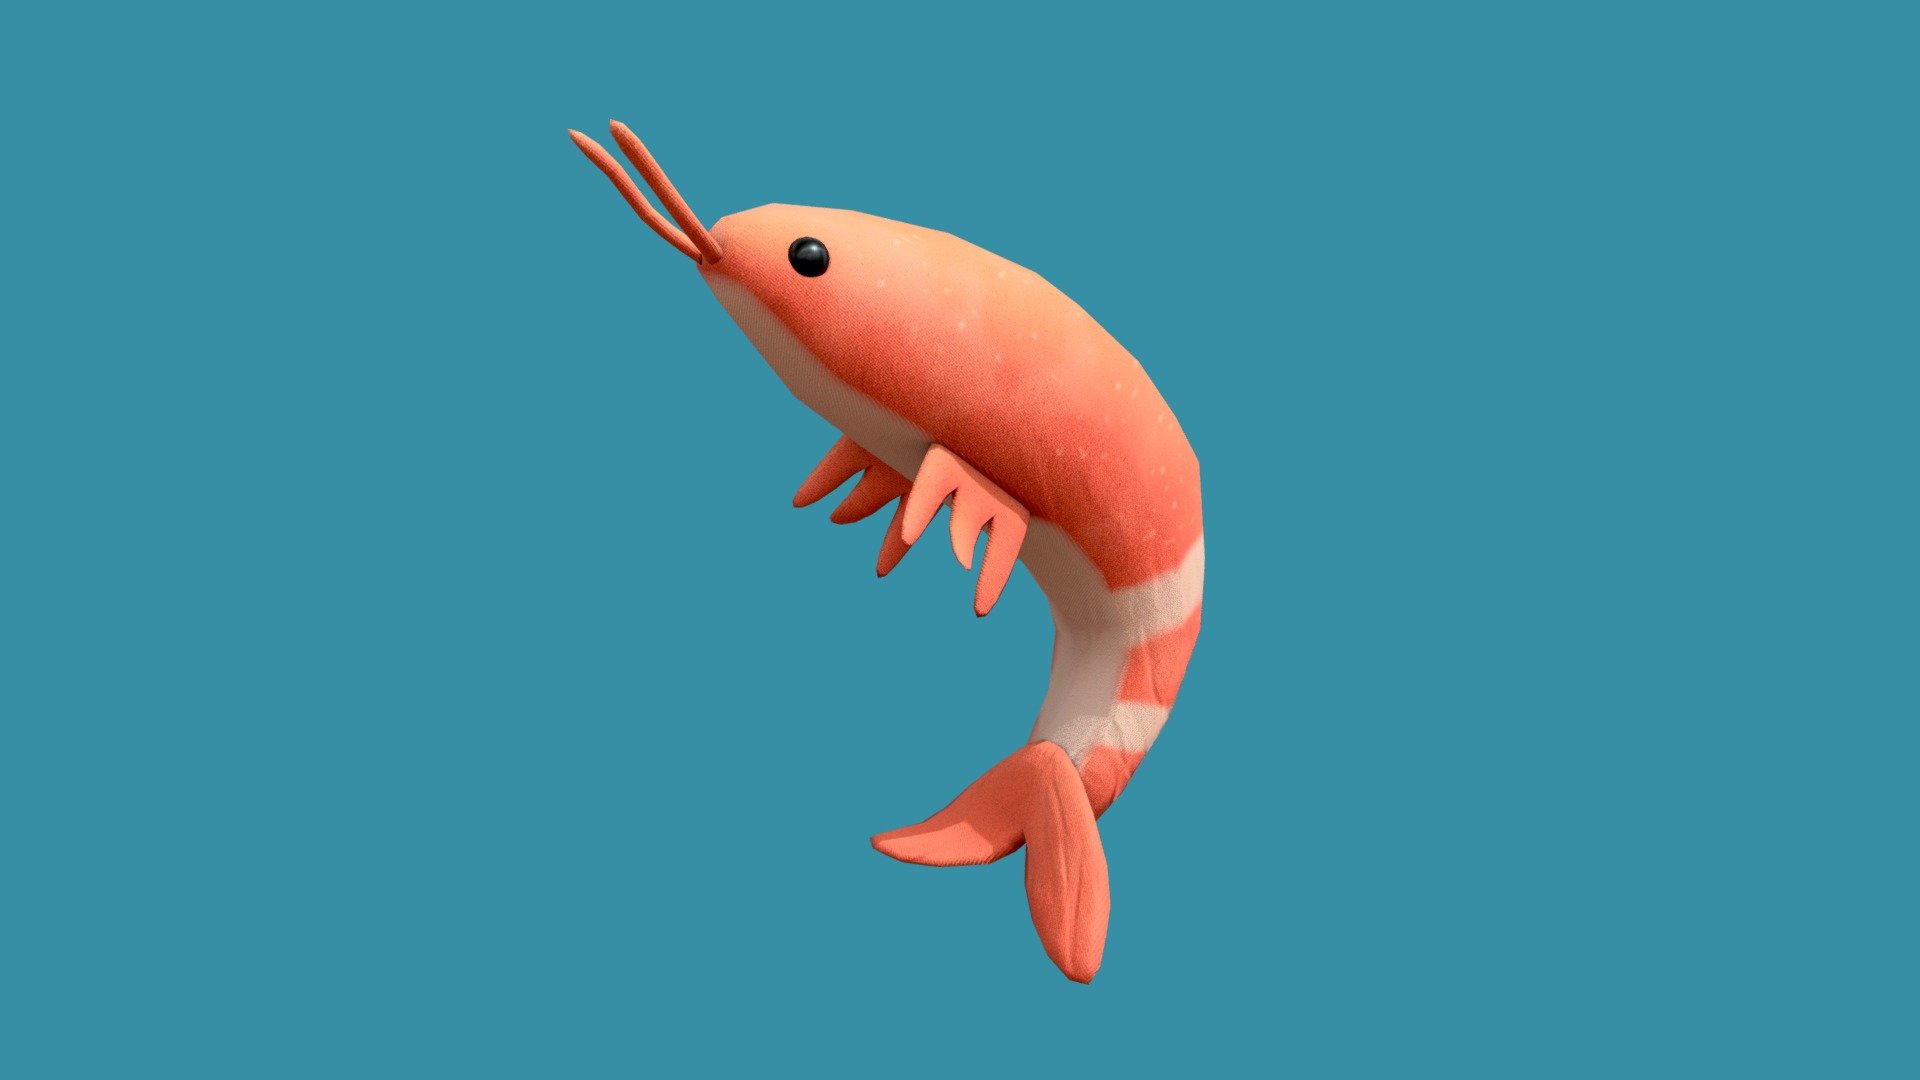 Low Poly Shrimp Toy for your renders and games

Textures:

Diffuse color, Roughness, AO, Normal

All textures are 2K

Files Formats:

Blend

Fbx

Obj - Shrimp Toy - Buy Royalty Free 3D model by Vanessa Araújo (@vanessa3d) 3d model